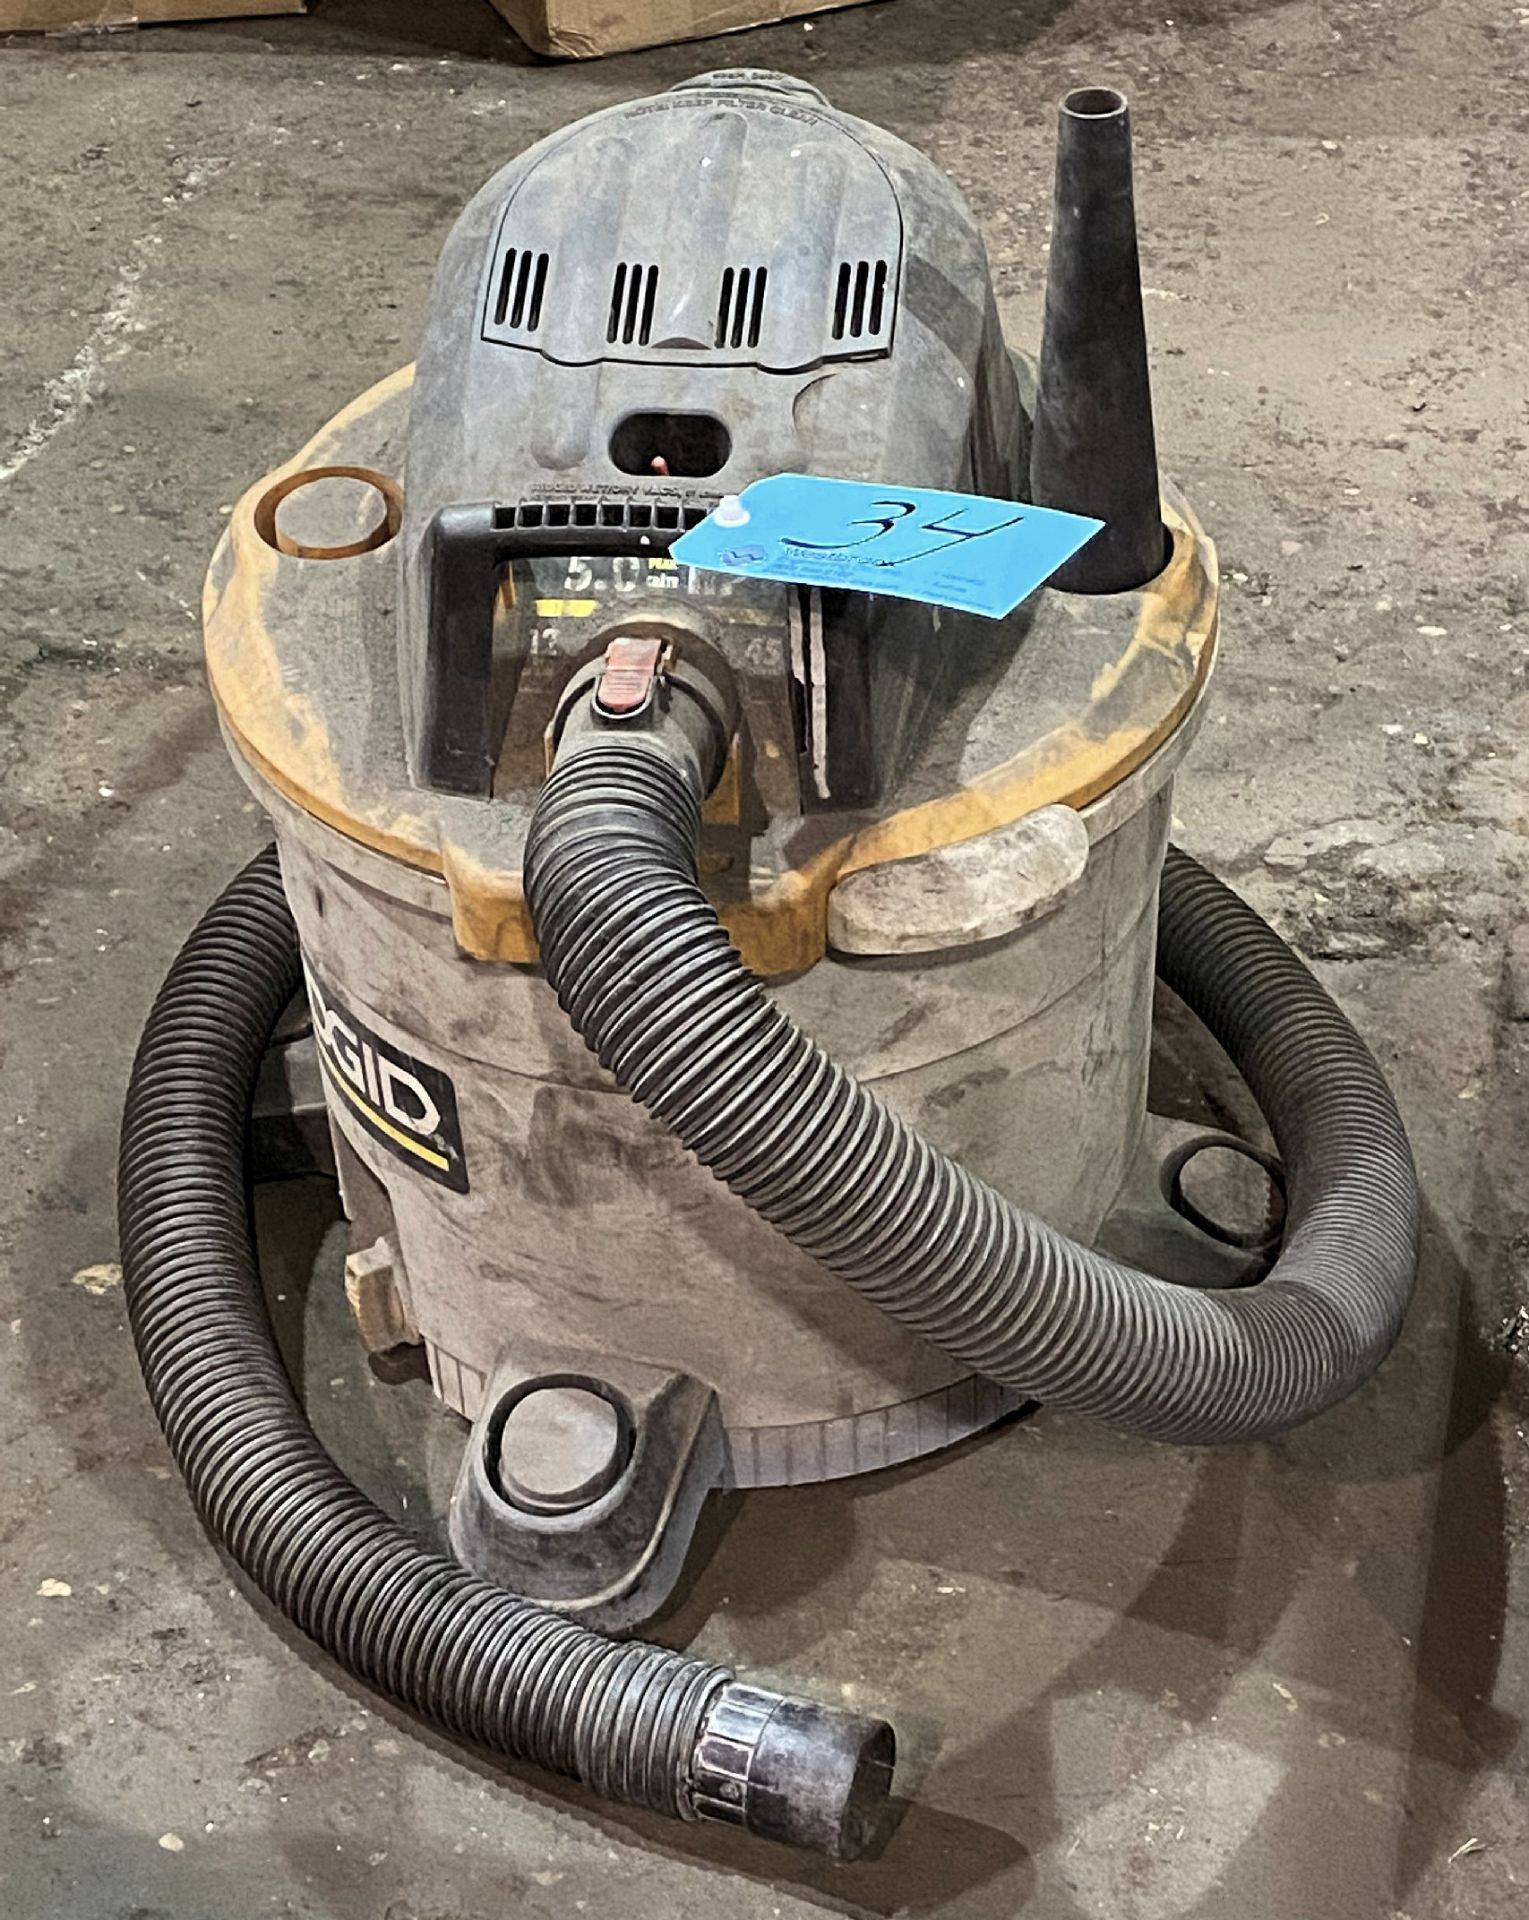 Ridgid Shop Vac with Hose and Attachment